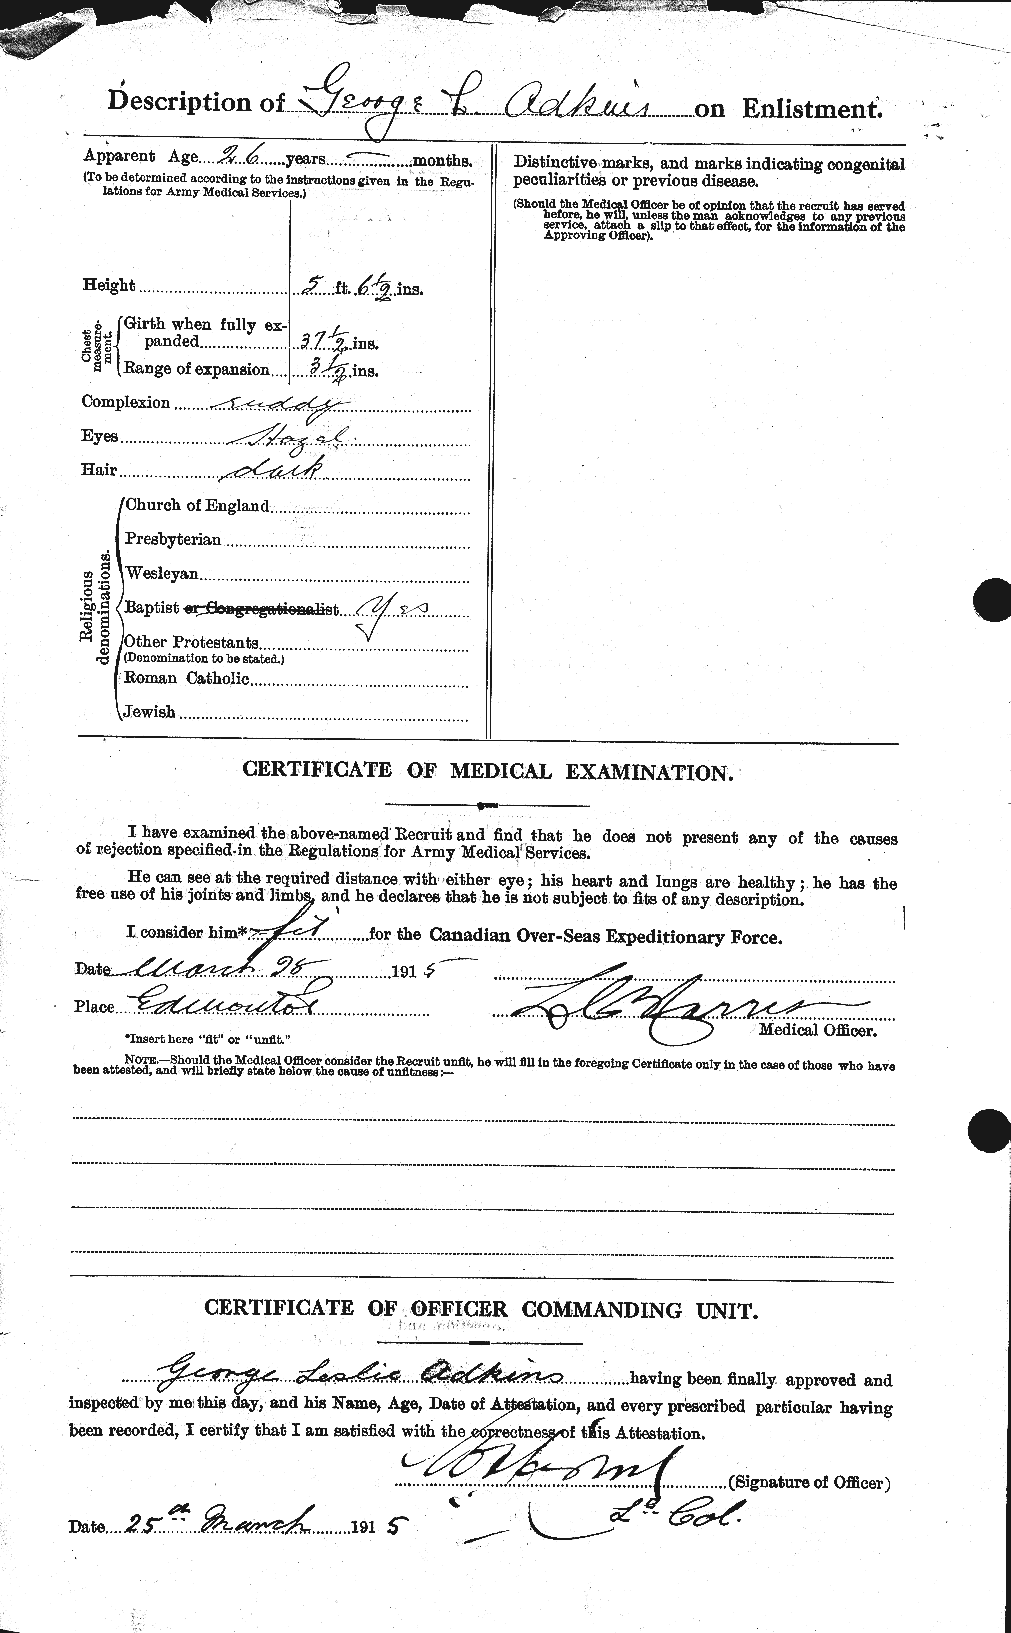 Personnel Records of the First World War - CEF 202834b